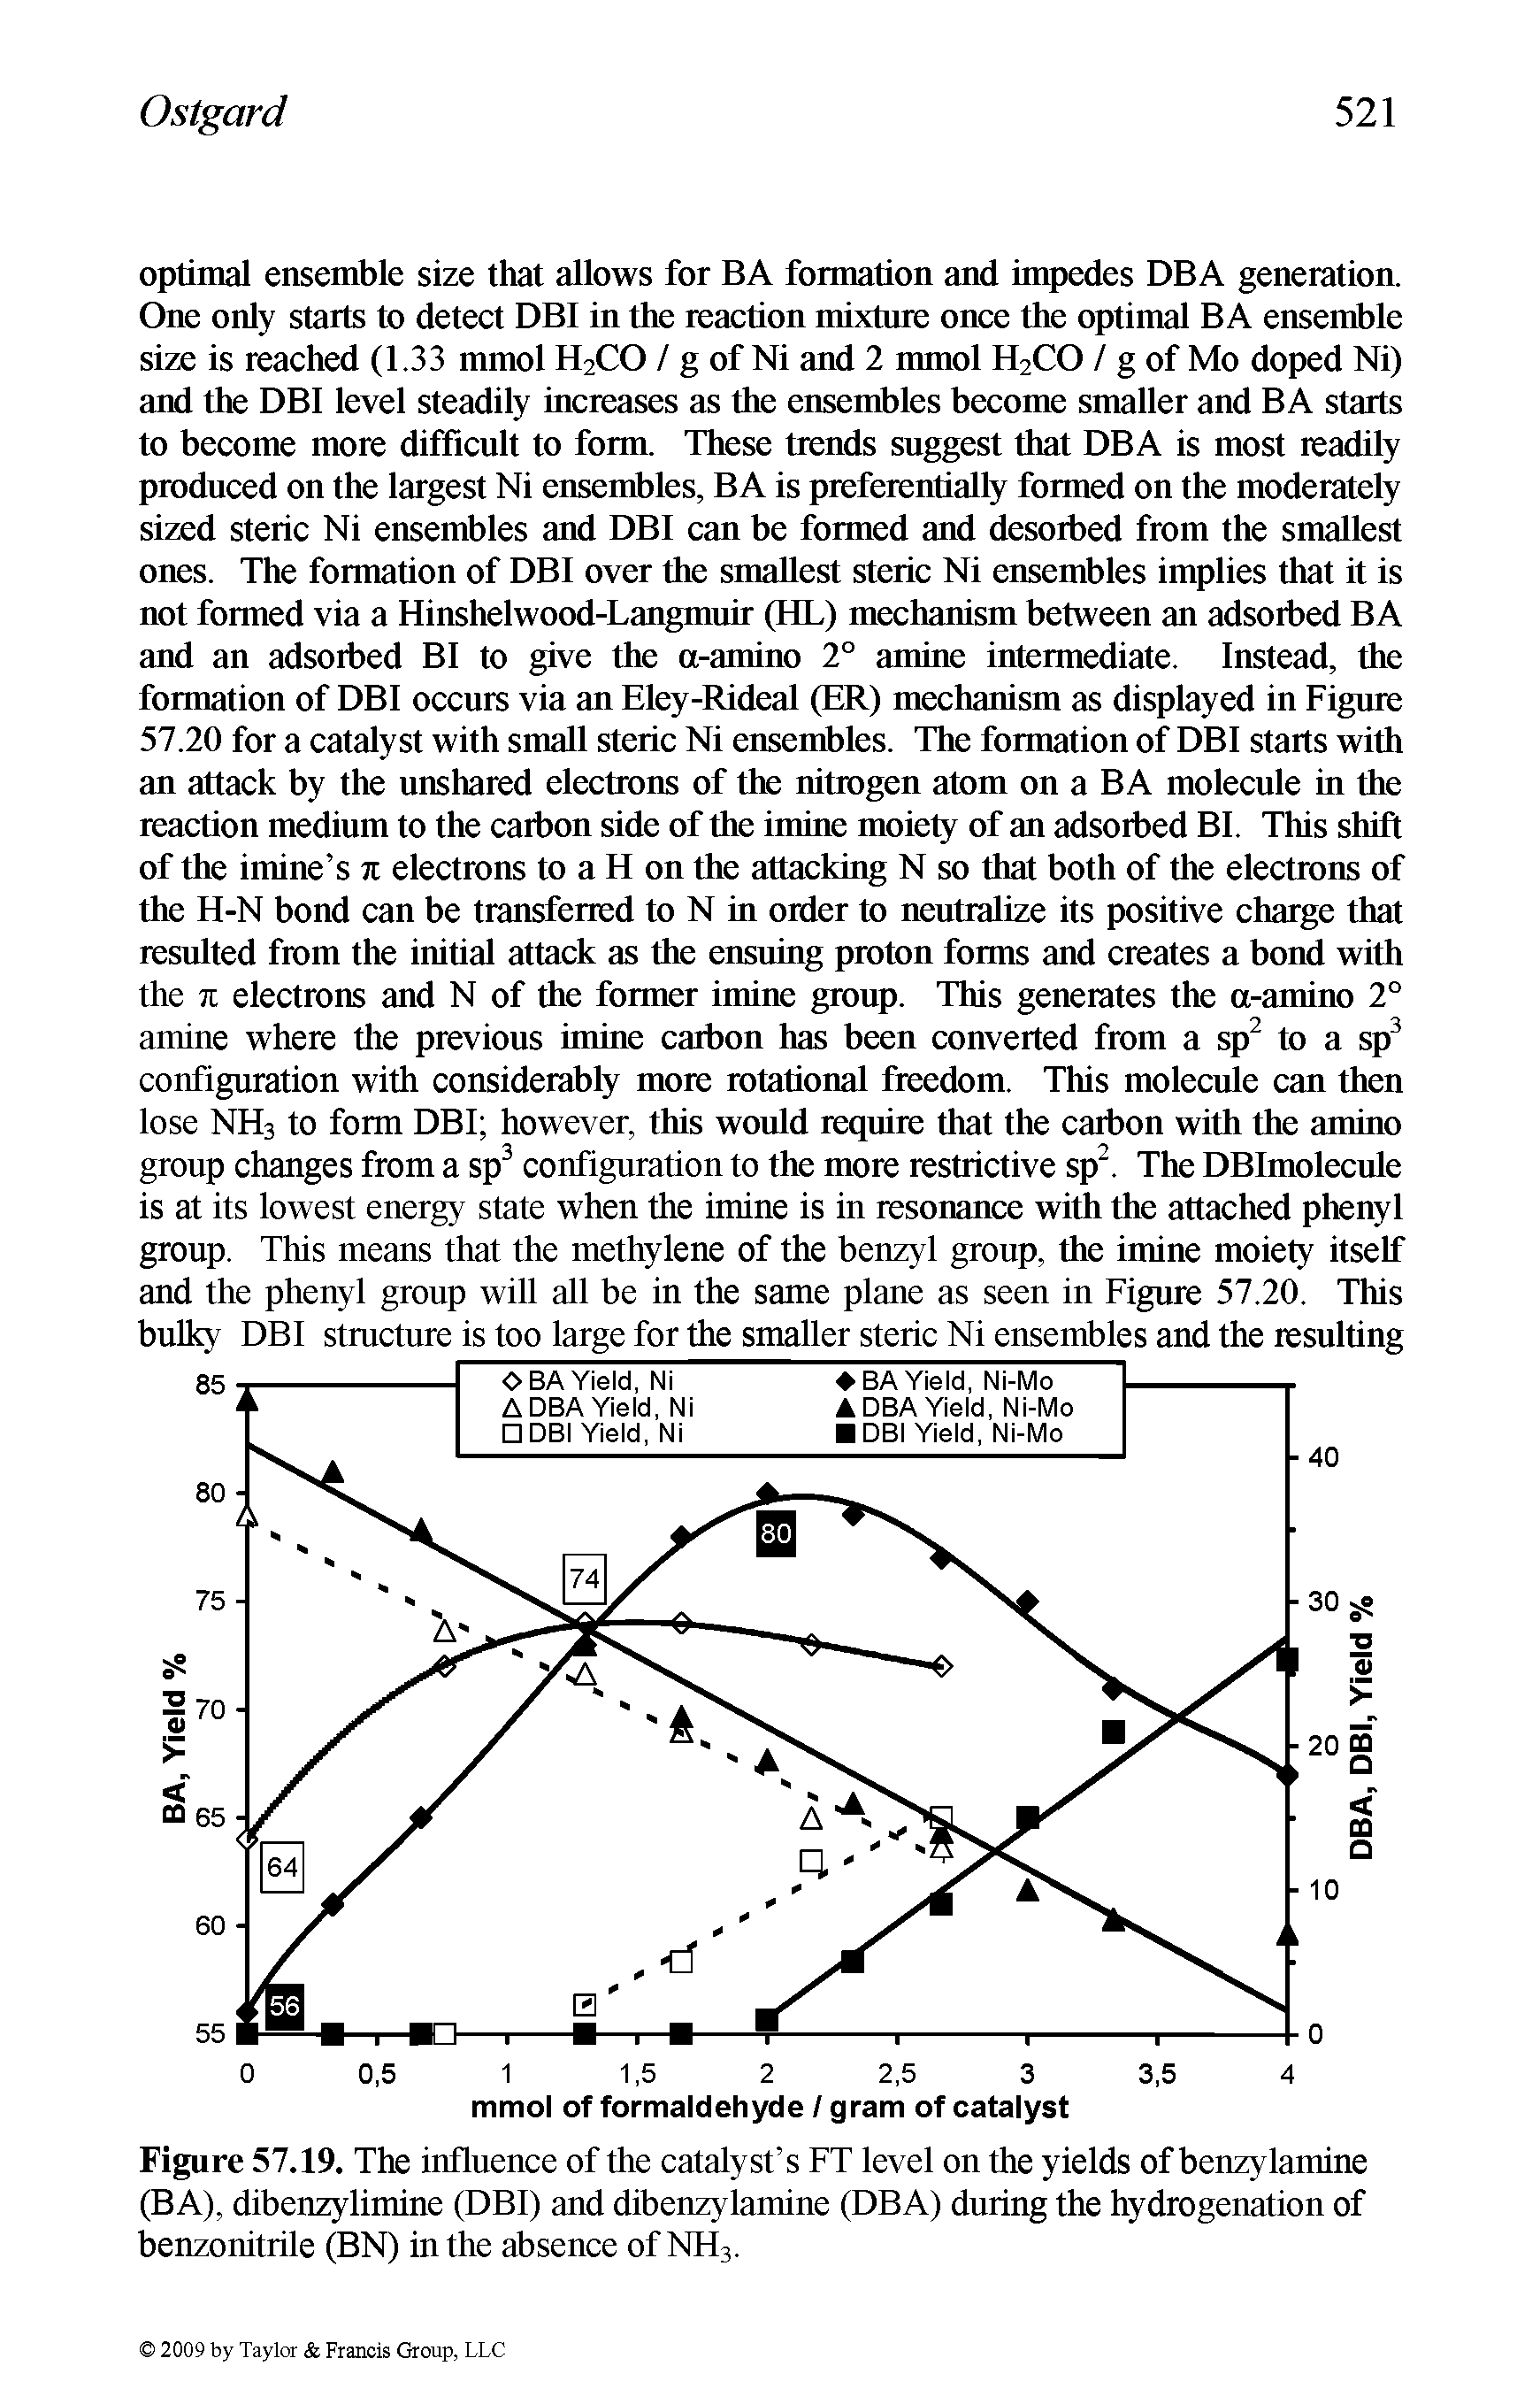 Figure 57.19. The influence of the catalyst s FT level on the yields of benzylamine (BA), dibenzylimine (DBI) and dibenzylamine (DBA) during the hydrogenation of benzonitrile (BN) in the absence of NH3.